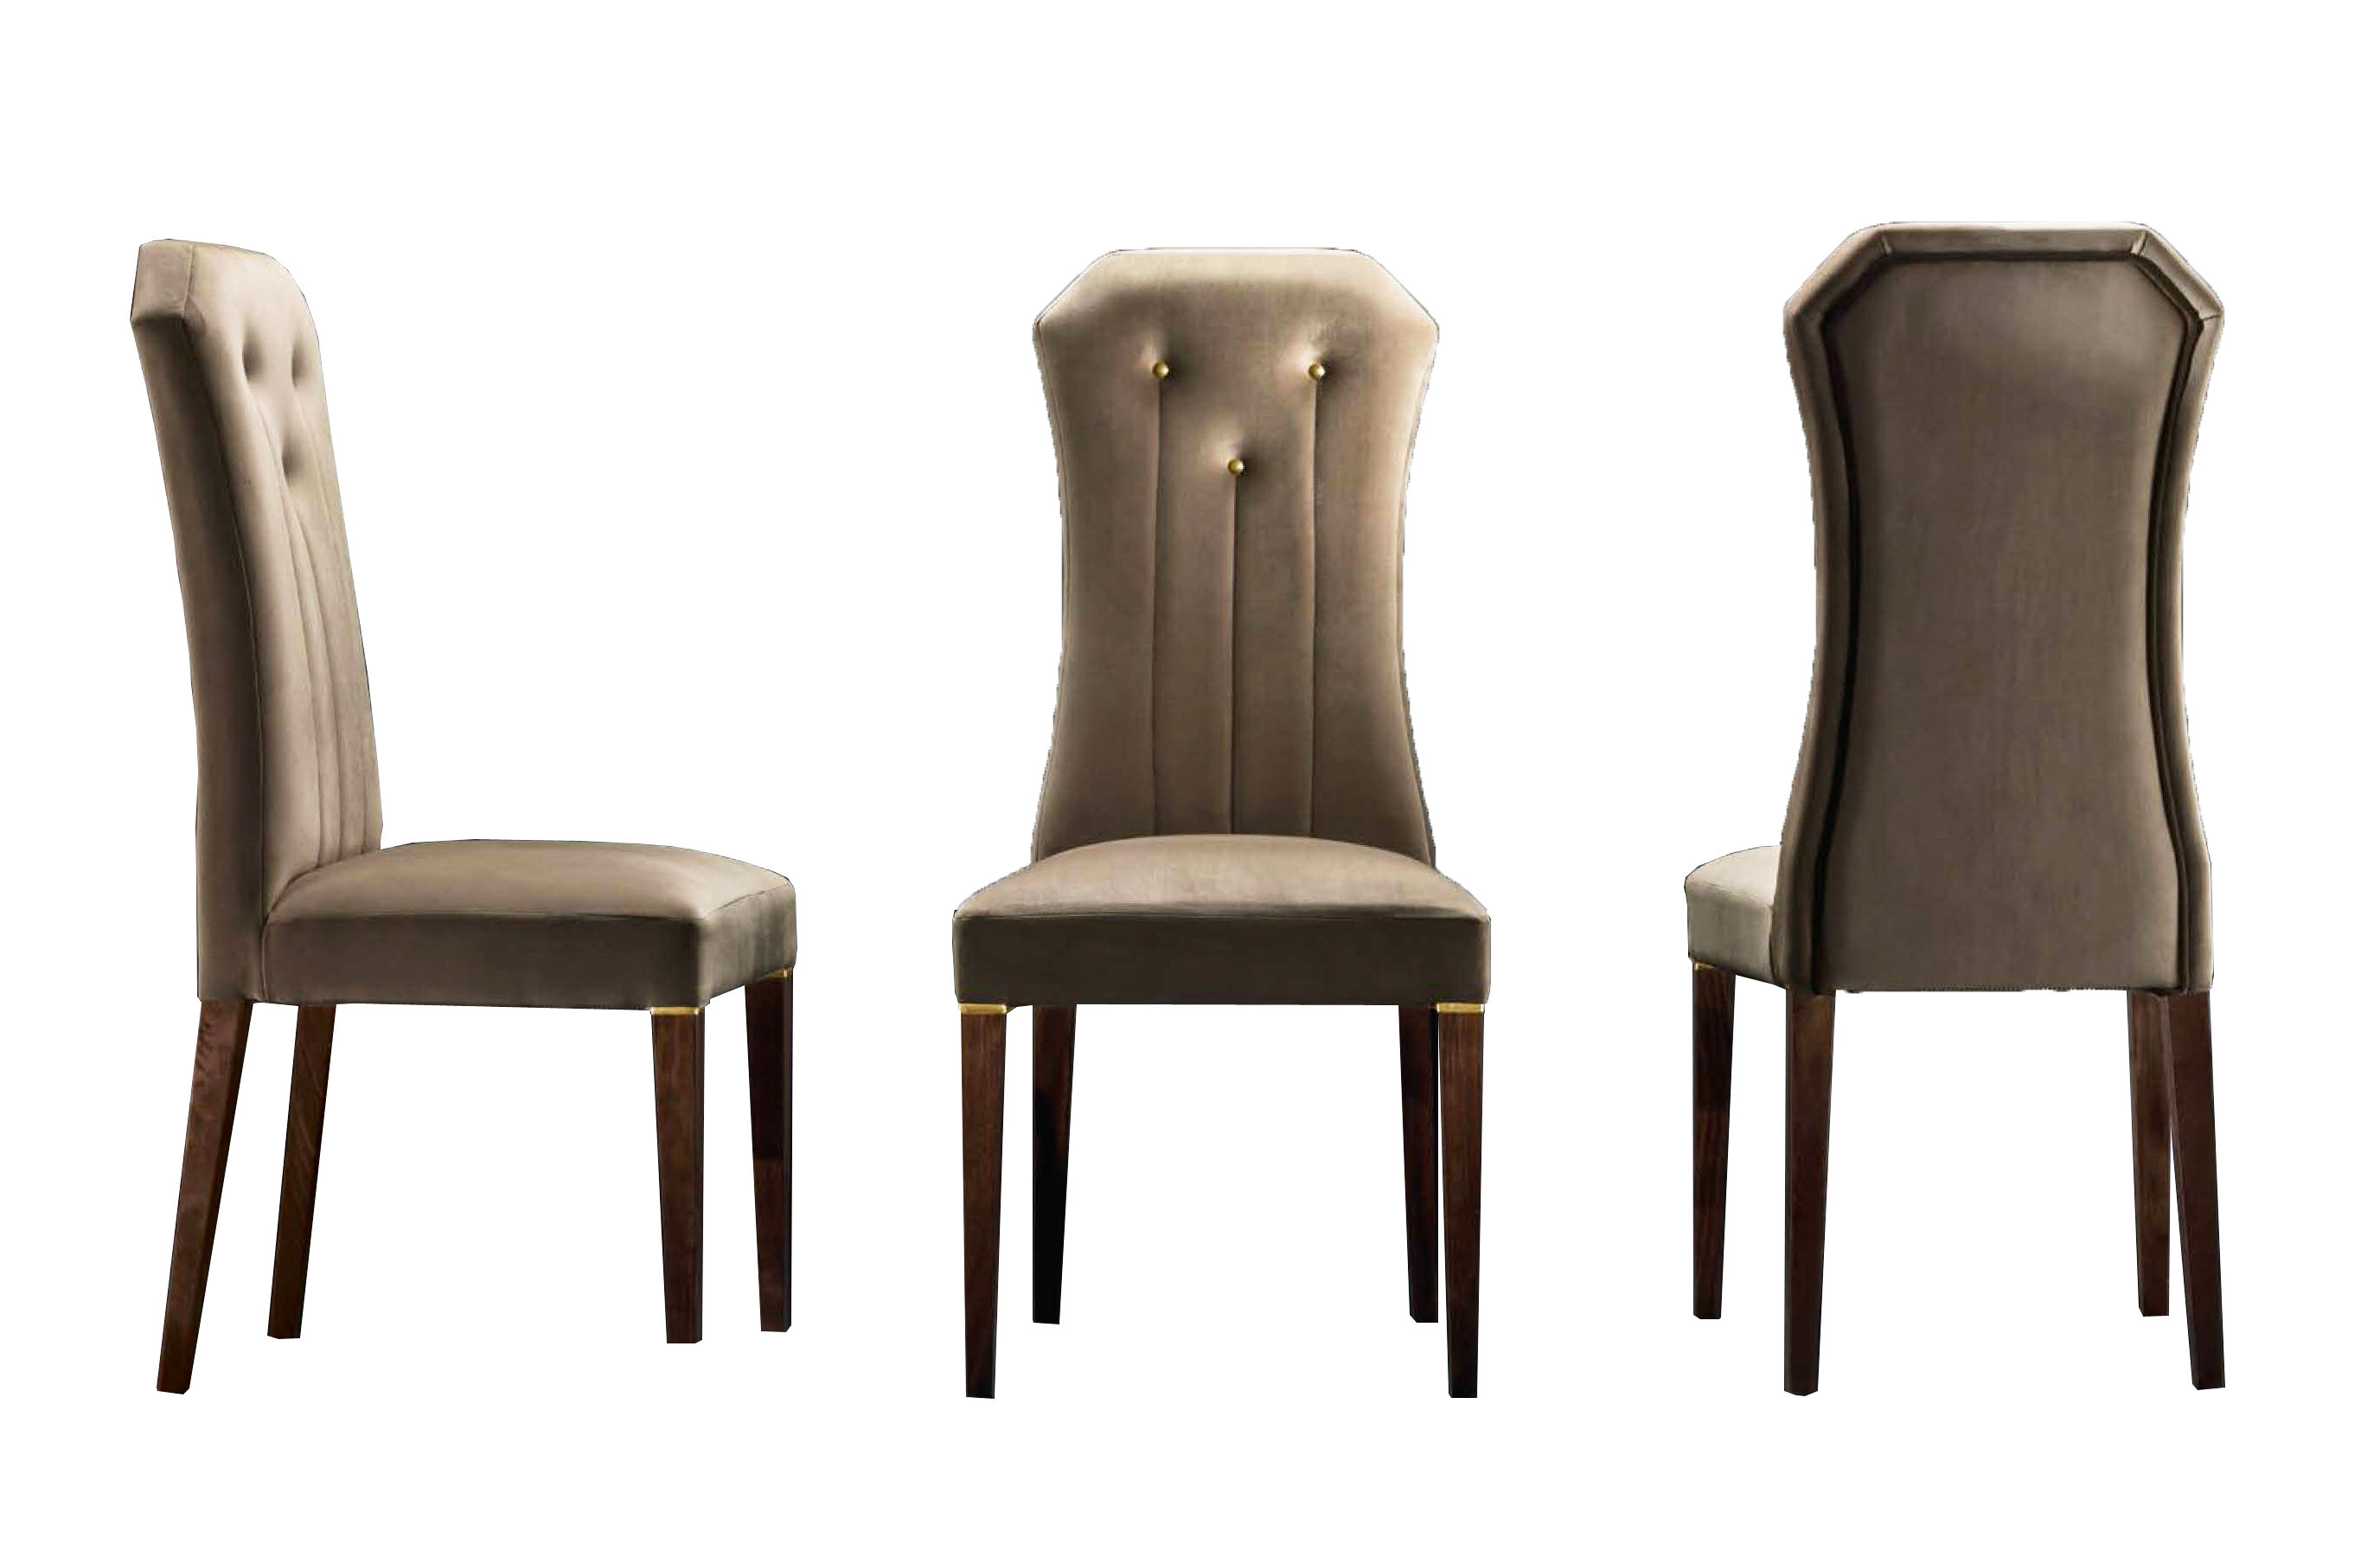 Brands Arredoclassic Living Room, Italy Diamante Dining Chair by Arredoclassic